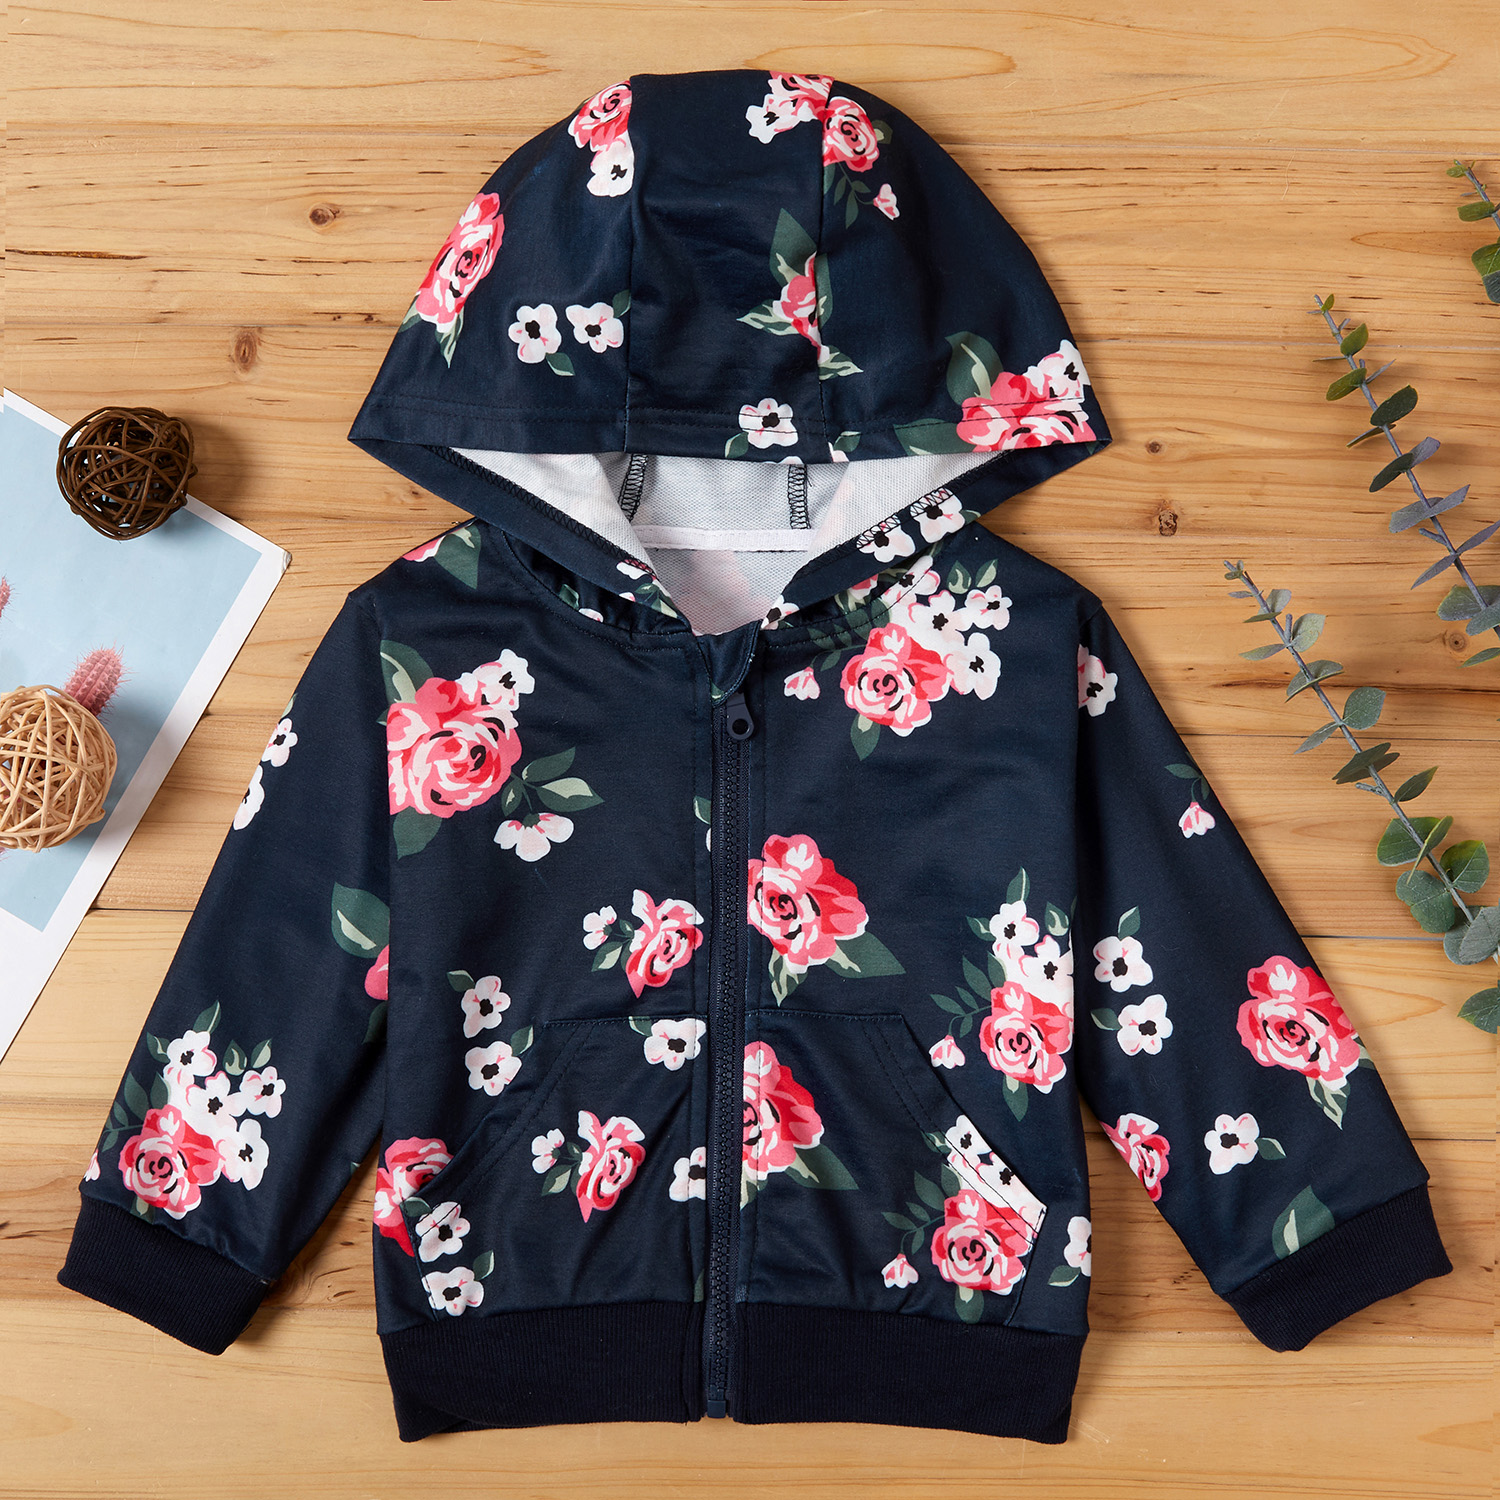 Baby Girl Sweet Floral Coat & Jacket Hooded Long-sleeve Fashion Infant Clothing Outfits